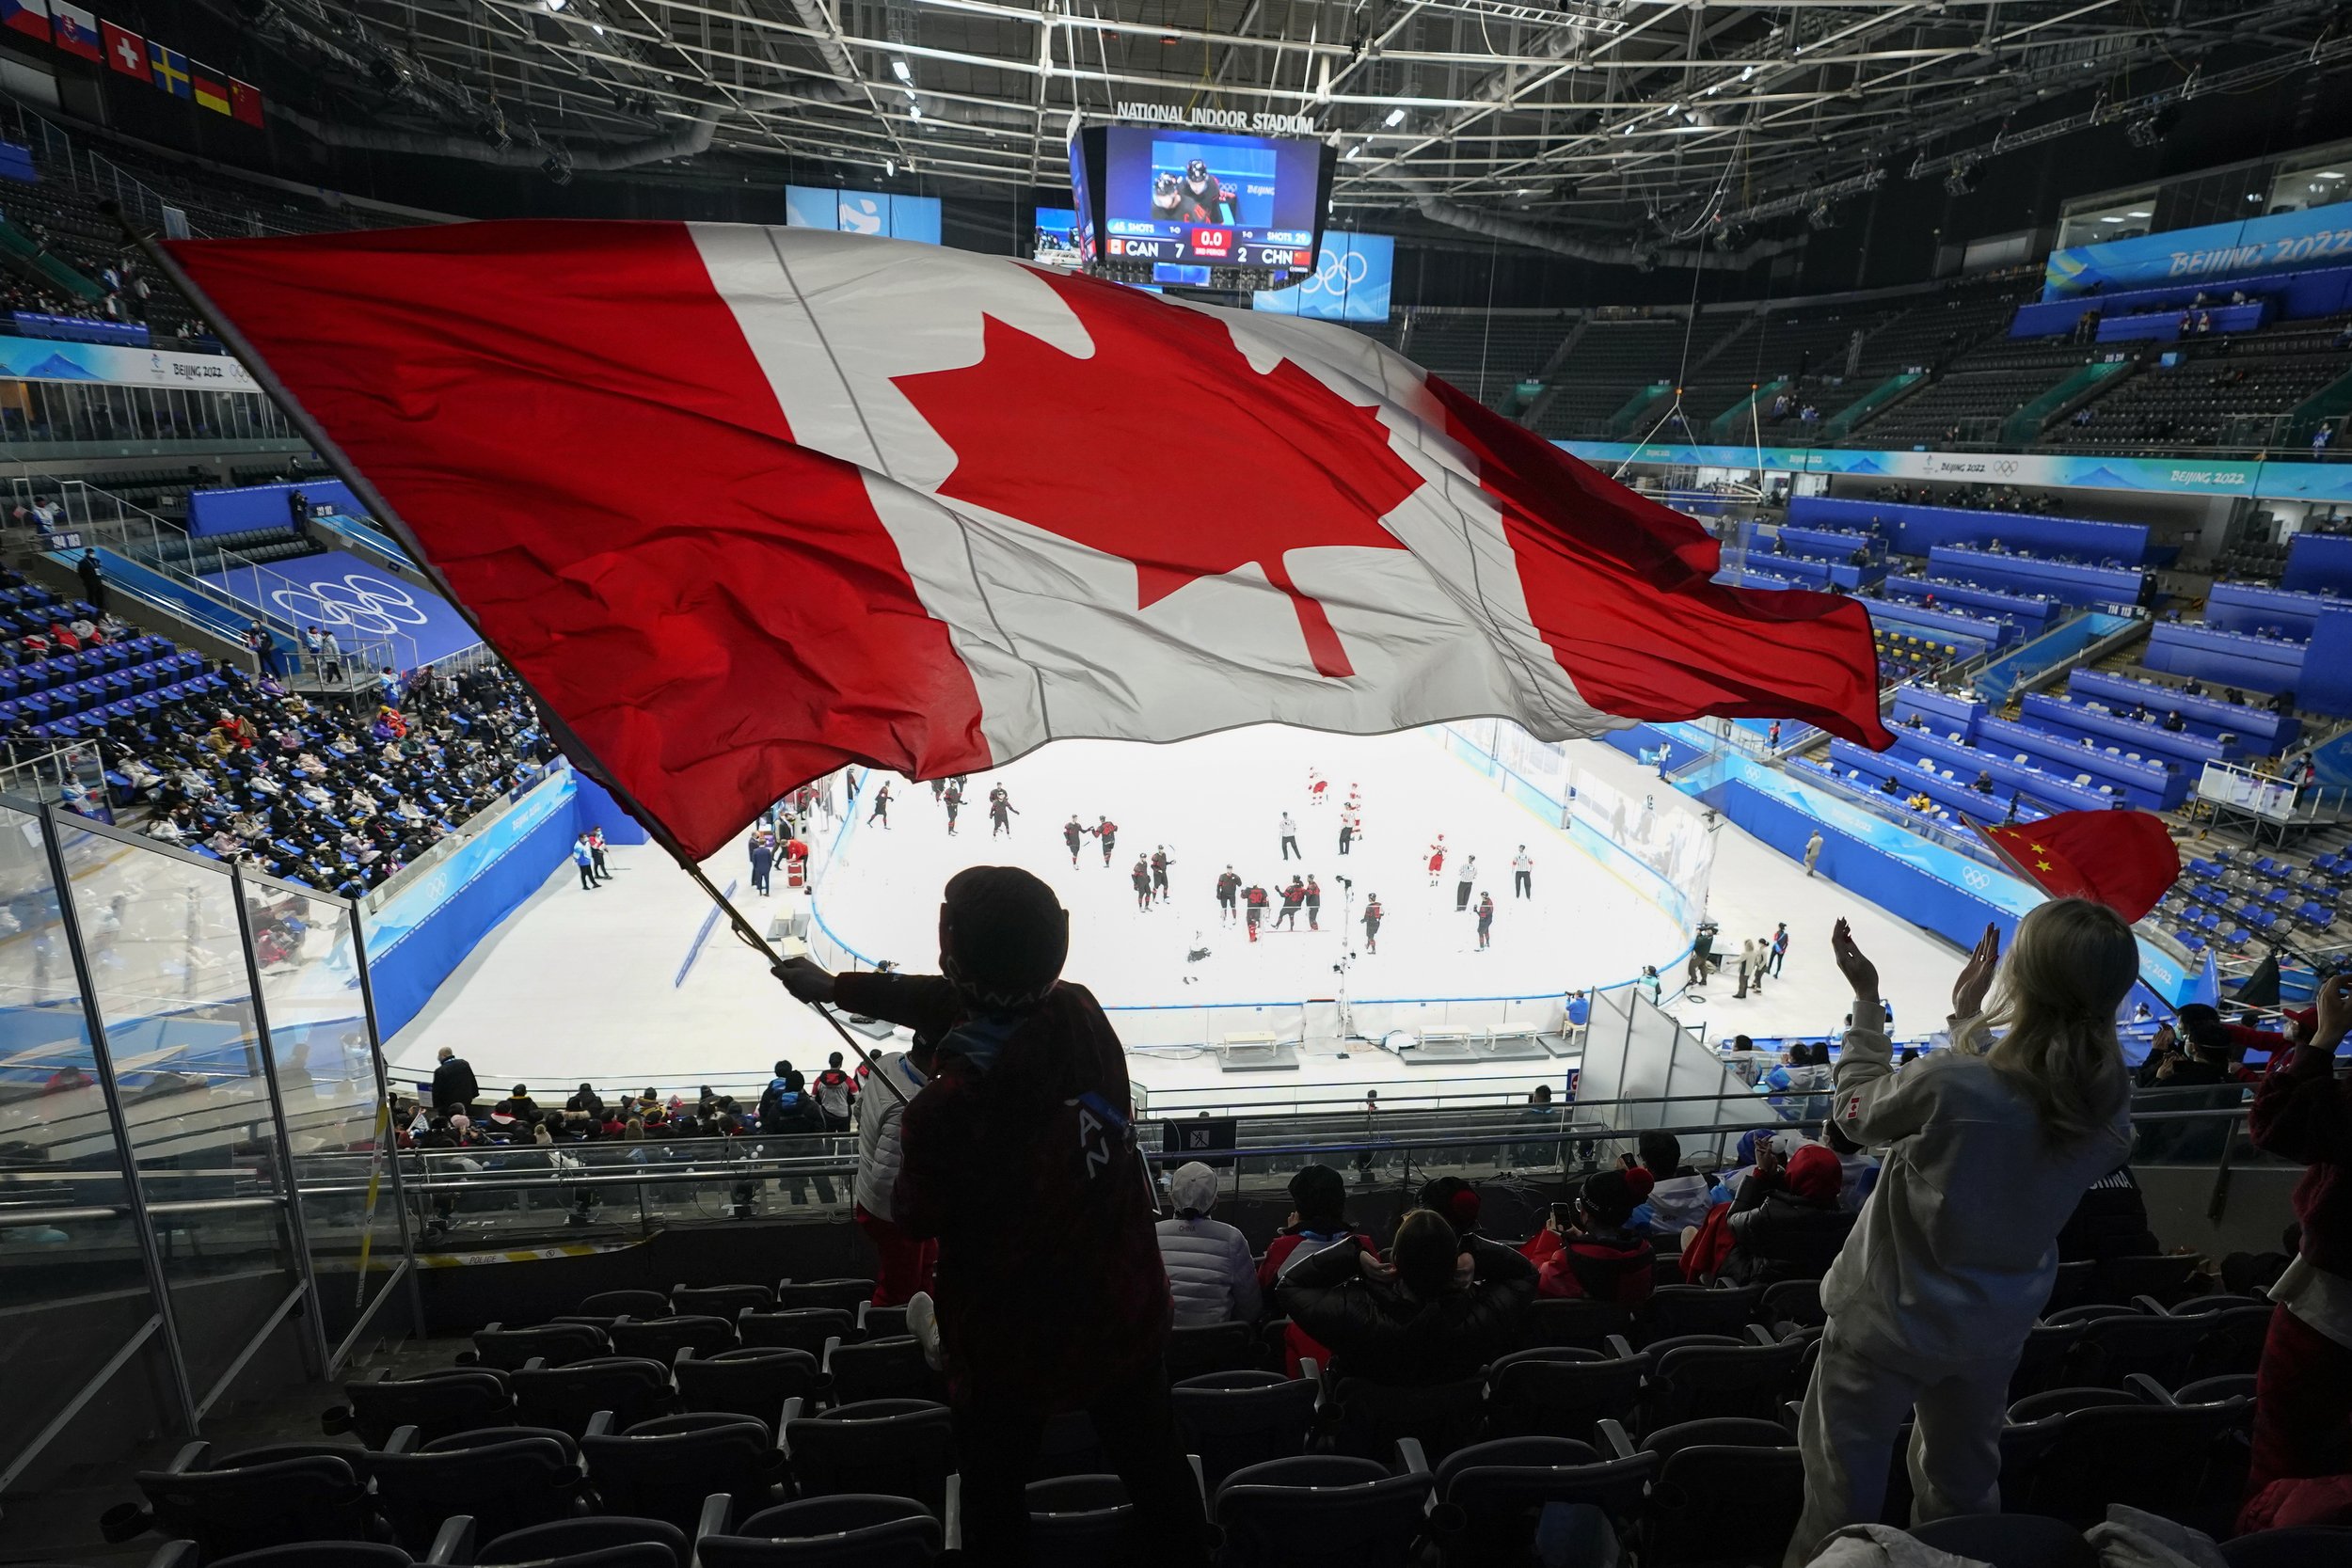  A fan waves a Canadian flag following a men's qualification round hockey game between Canada and China at the 2022 Winter Olympics, Tuesday, Feb. 15, 2022, in Beijing. Canada won 7-2. (AP Photo/Mark Humphrey) 